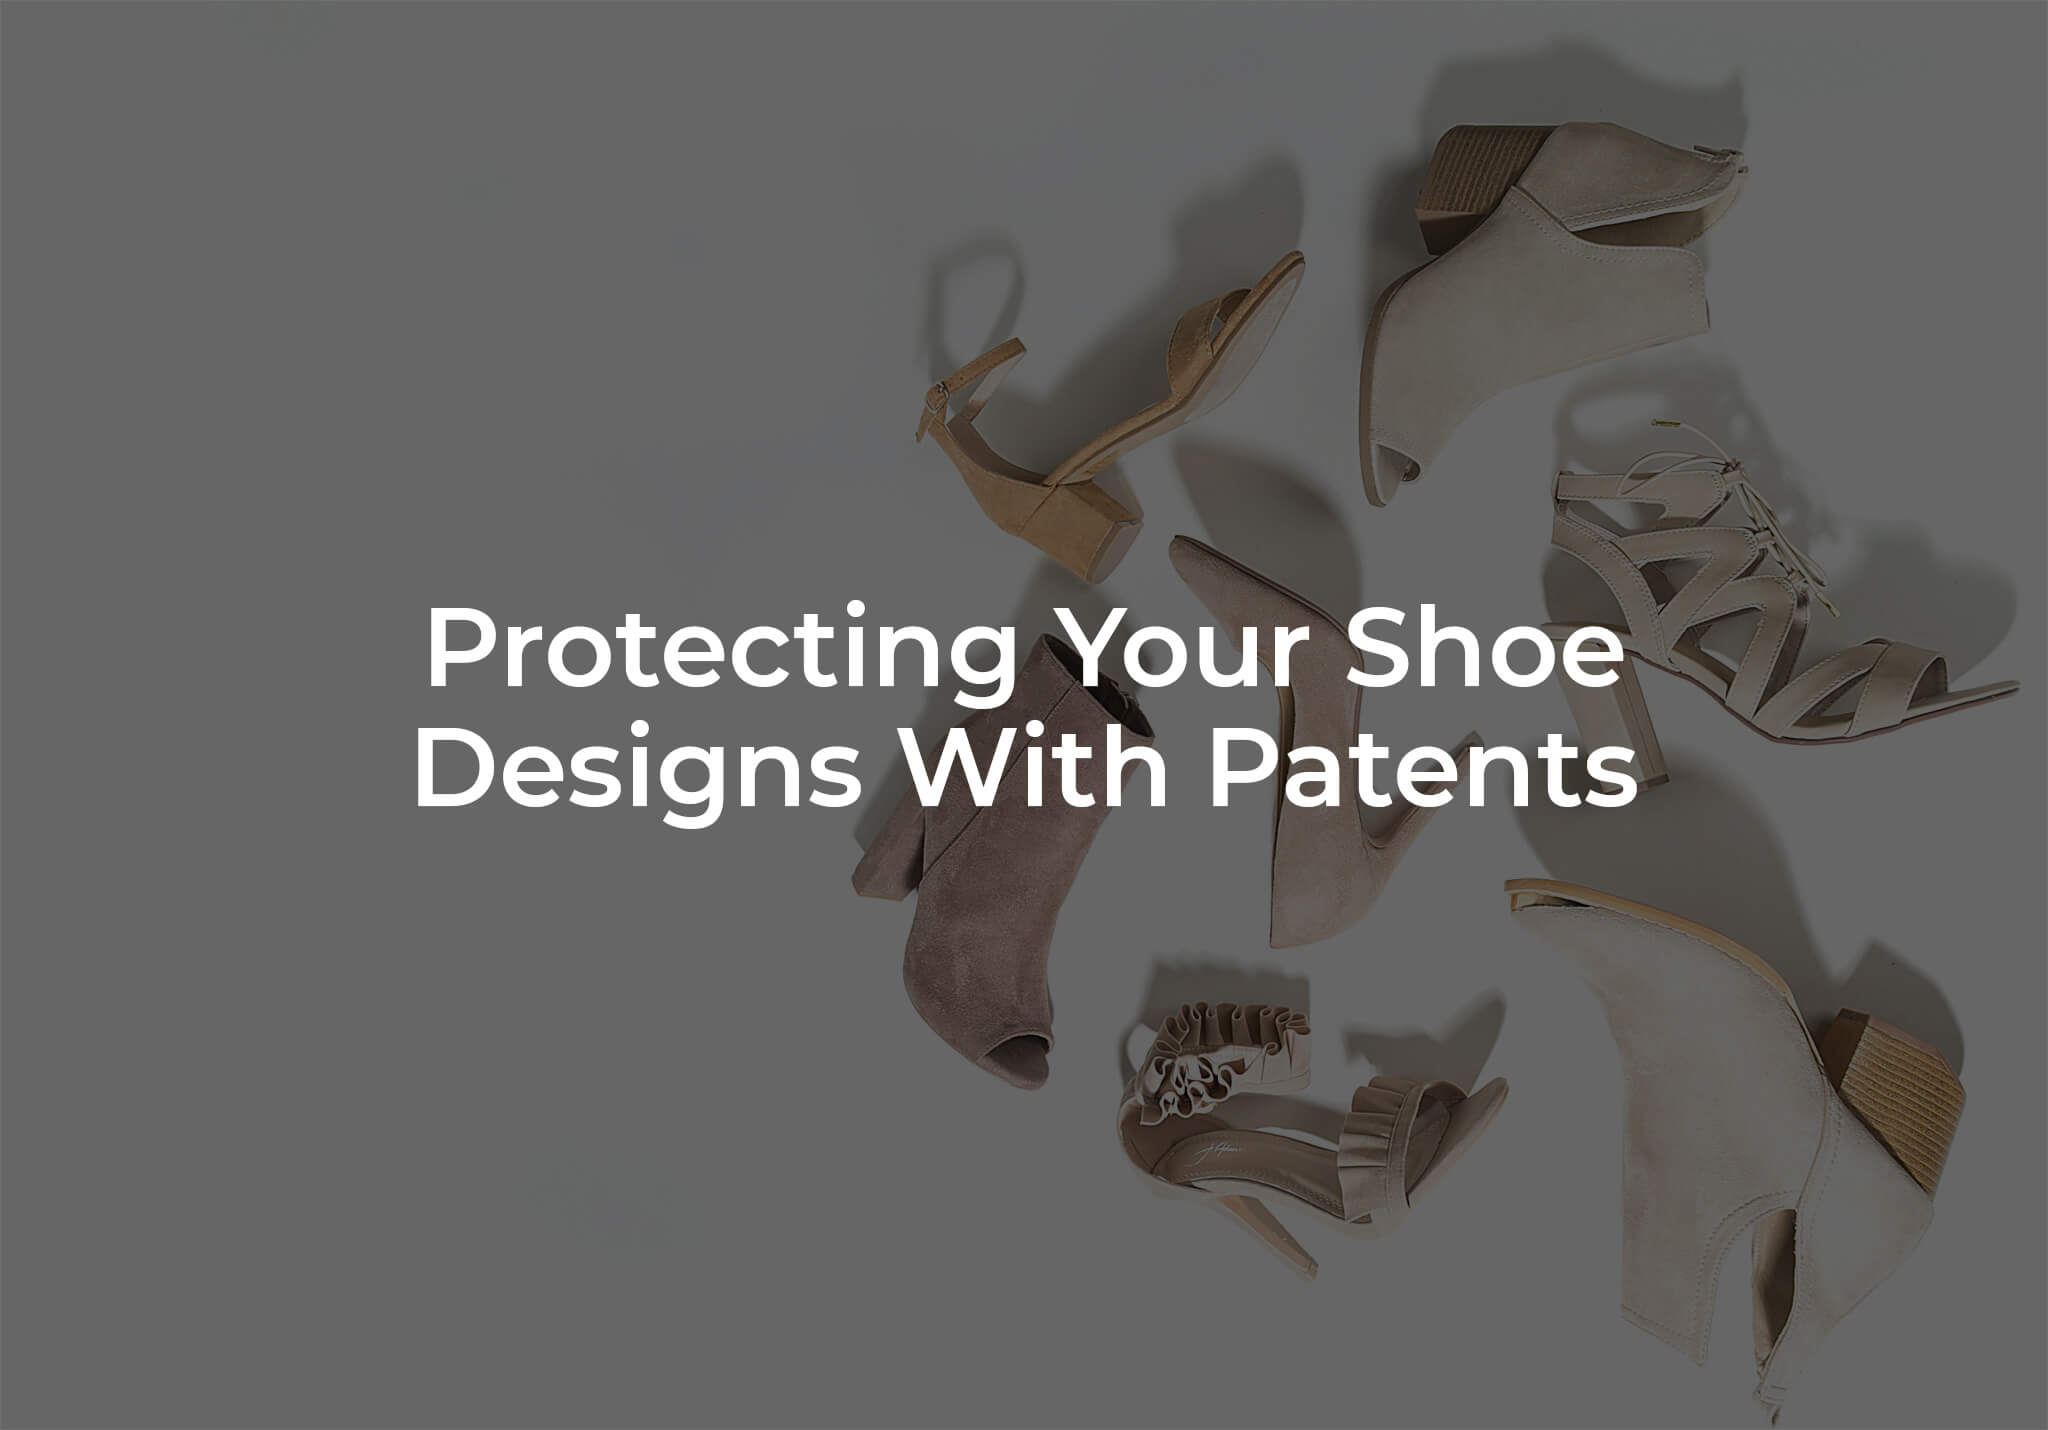 Protecting Shoe Designs With Patents